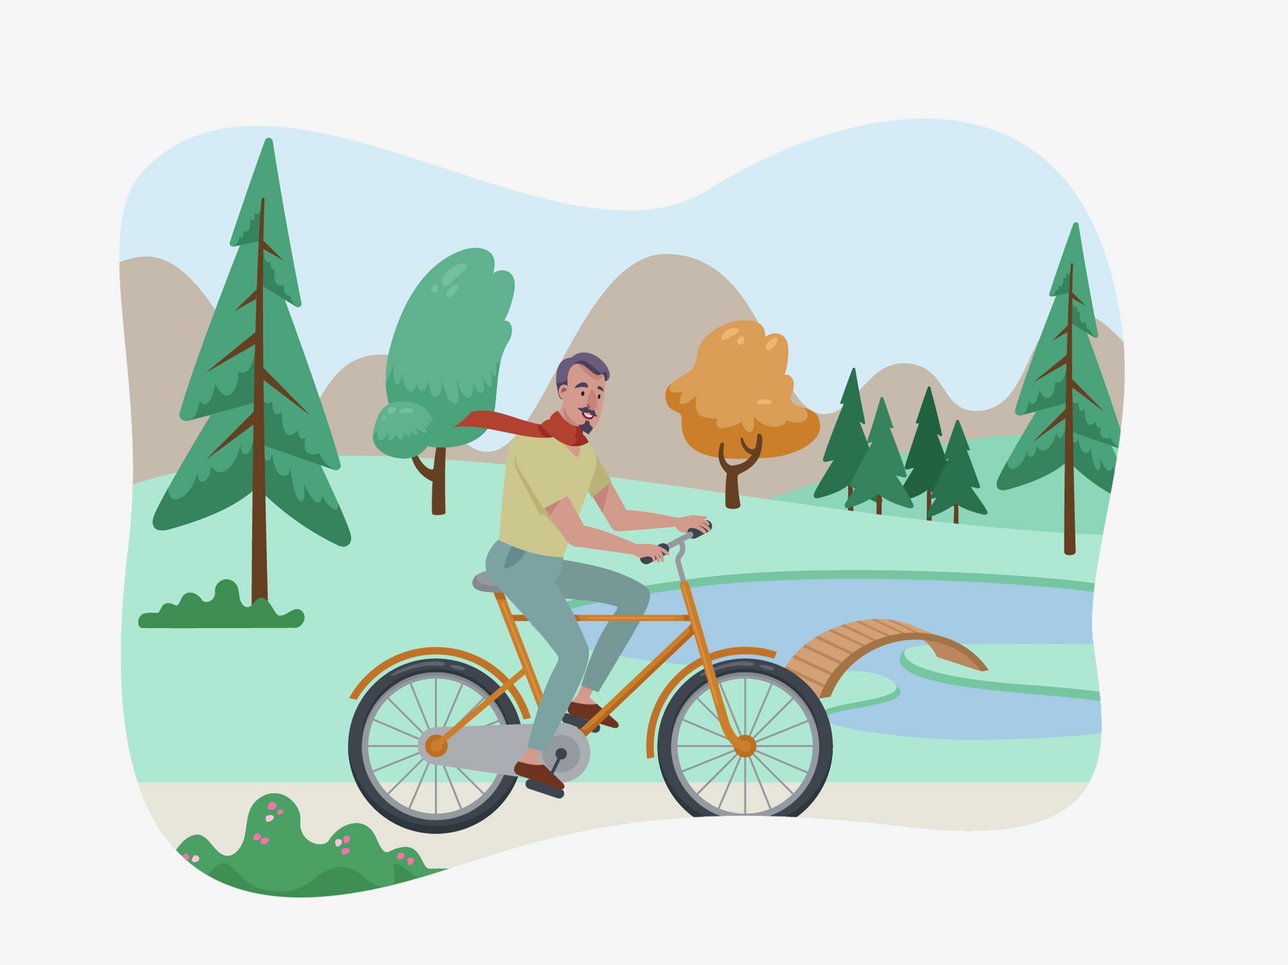 [Translate to Slovenia:] Man riding a bicycle